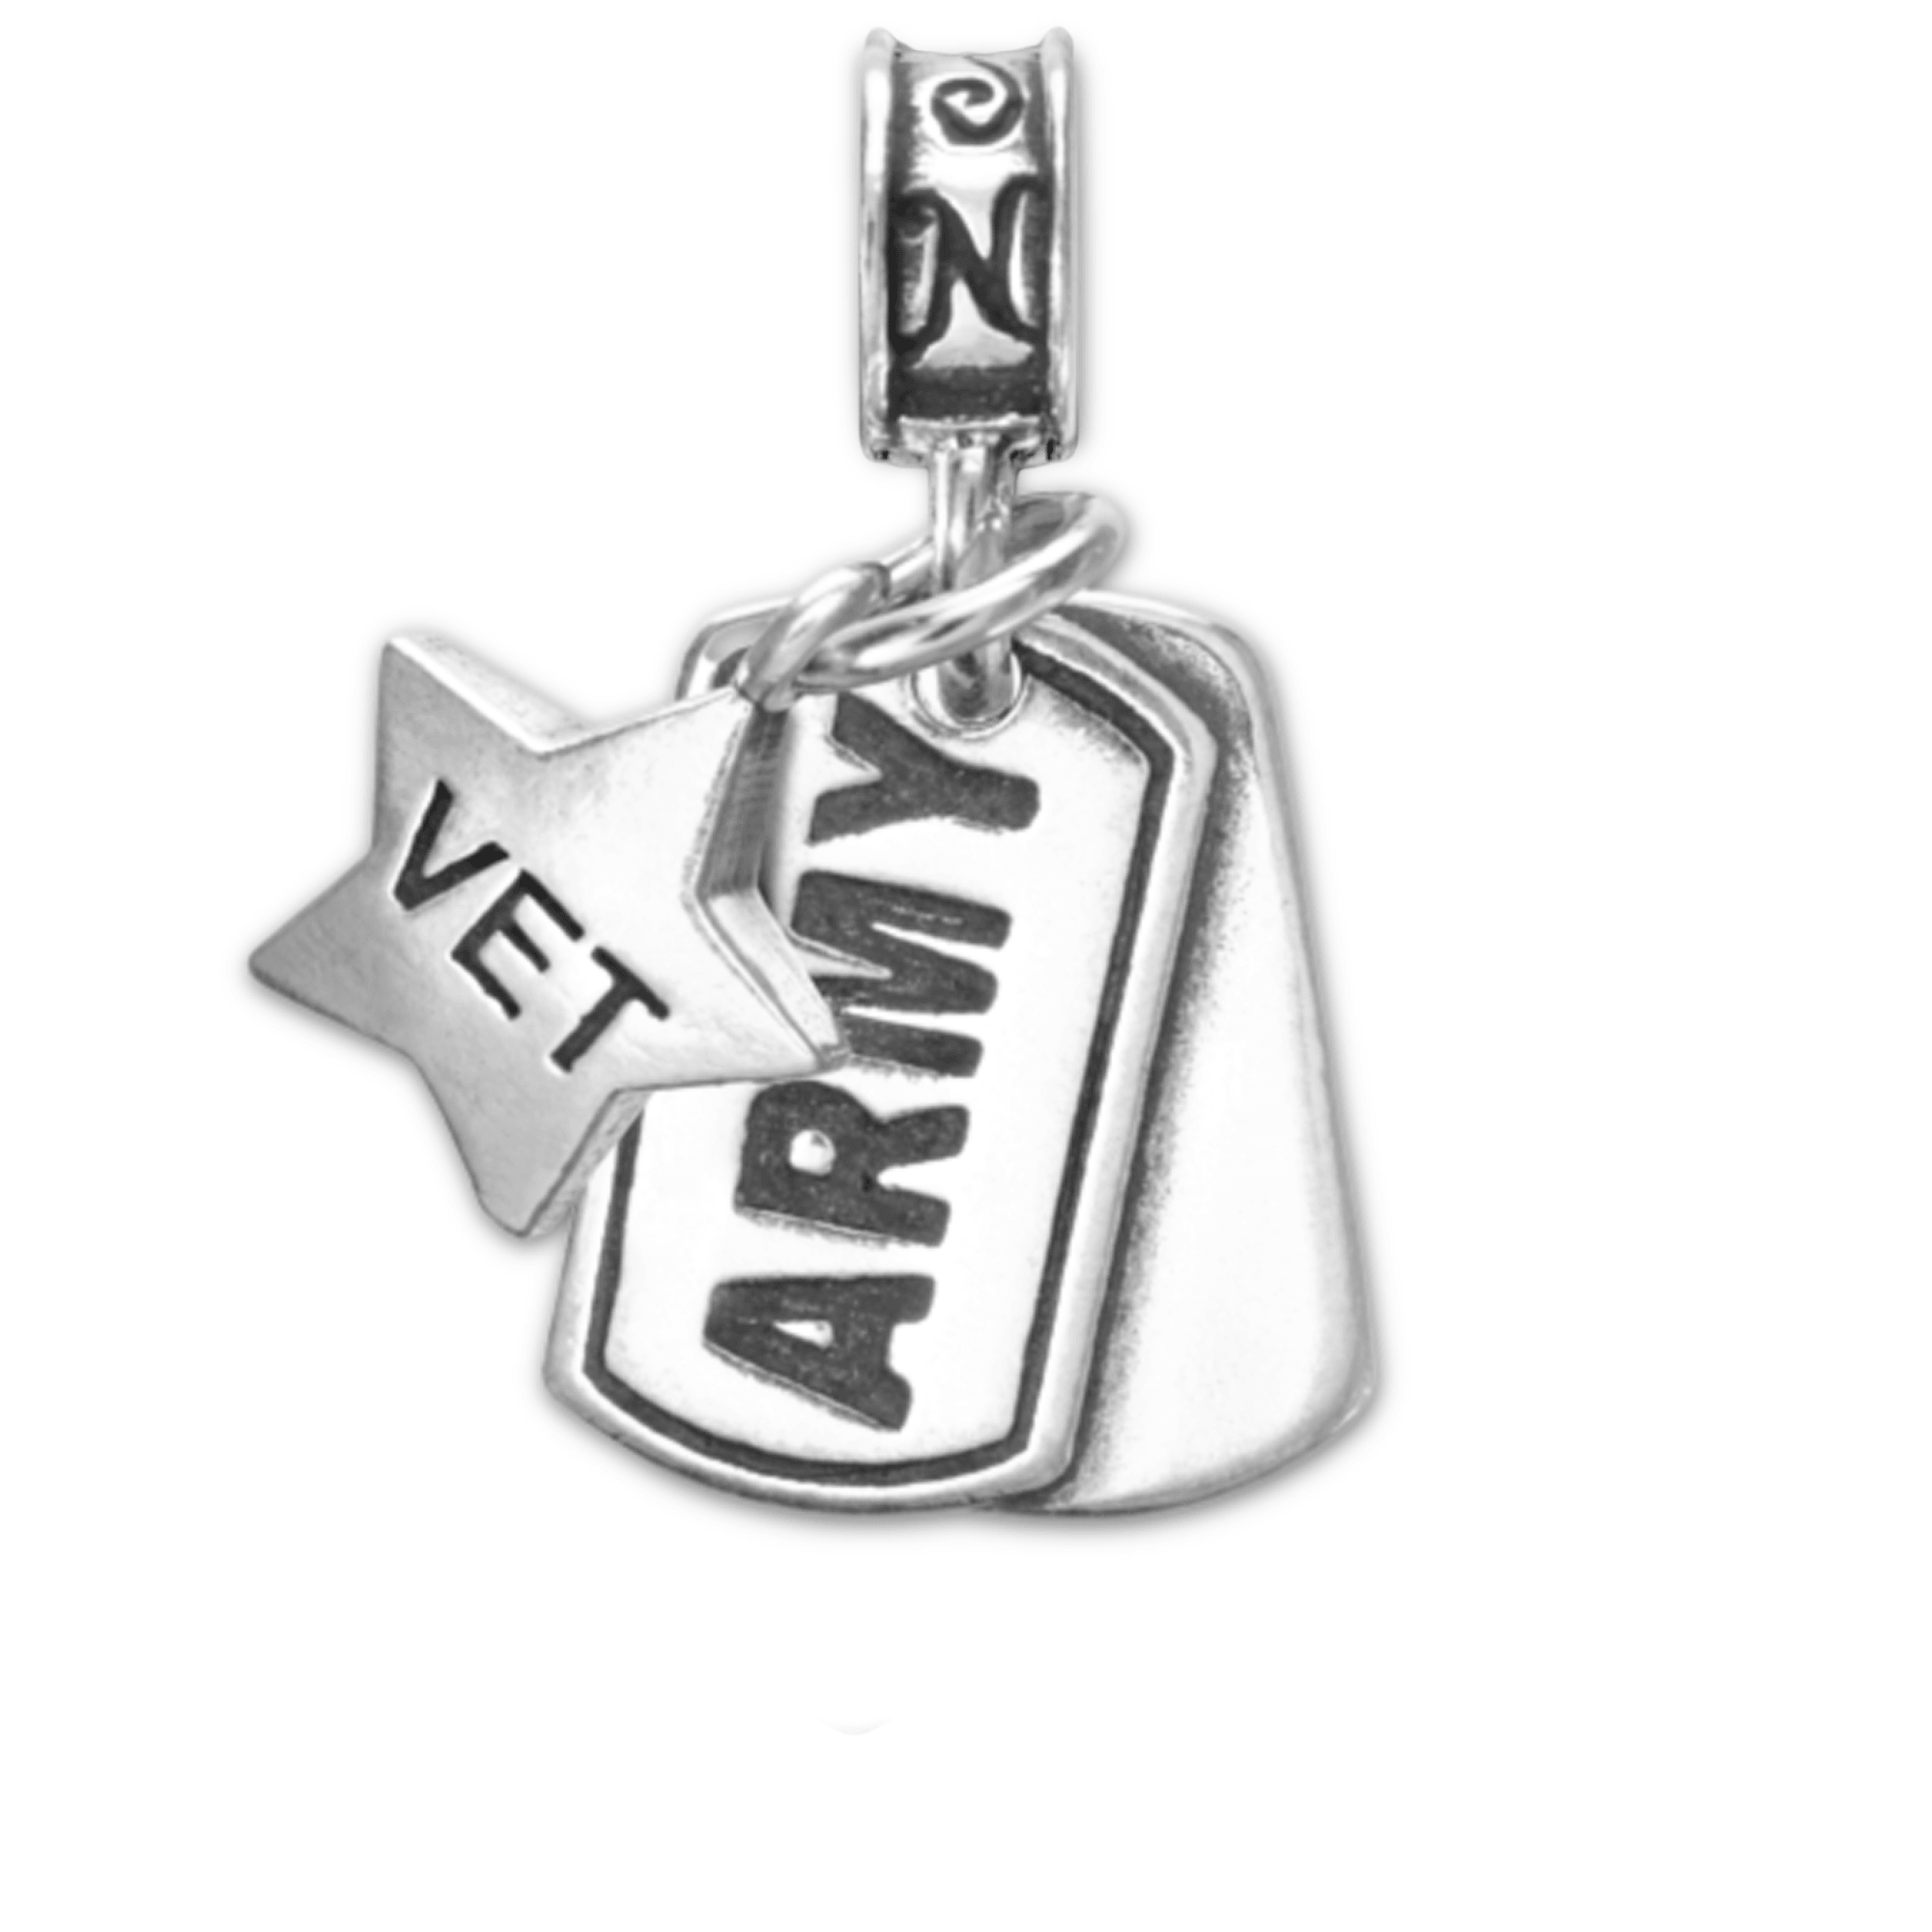 Military Jewelry, Military Charms, United States Army, Military Gifts, Dog Tag, Army Vet Vetern